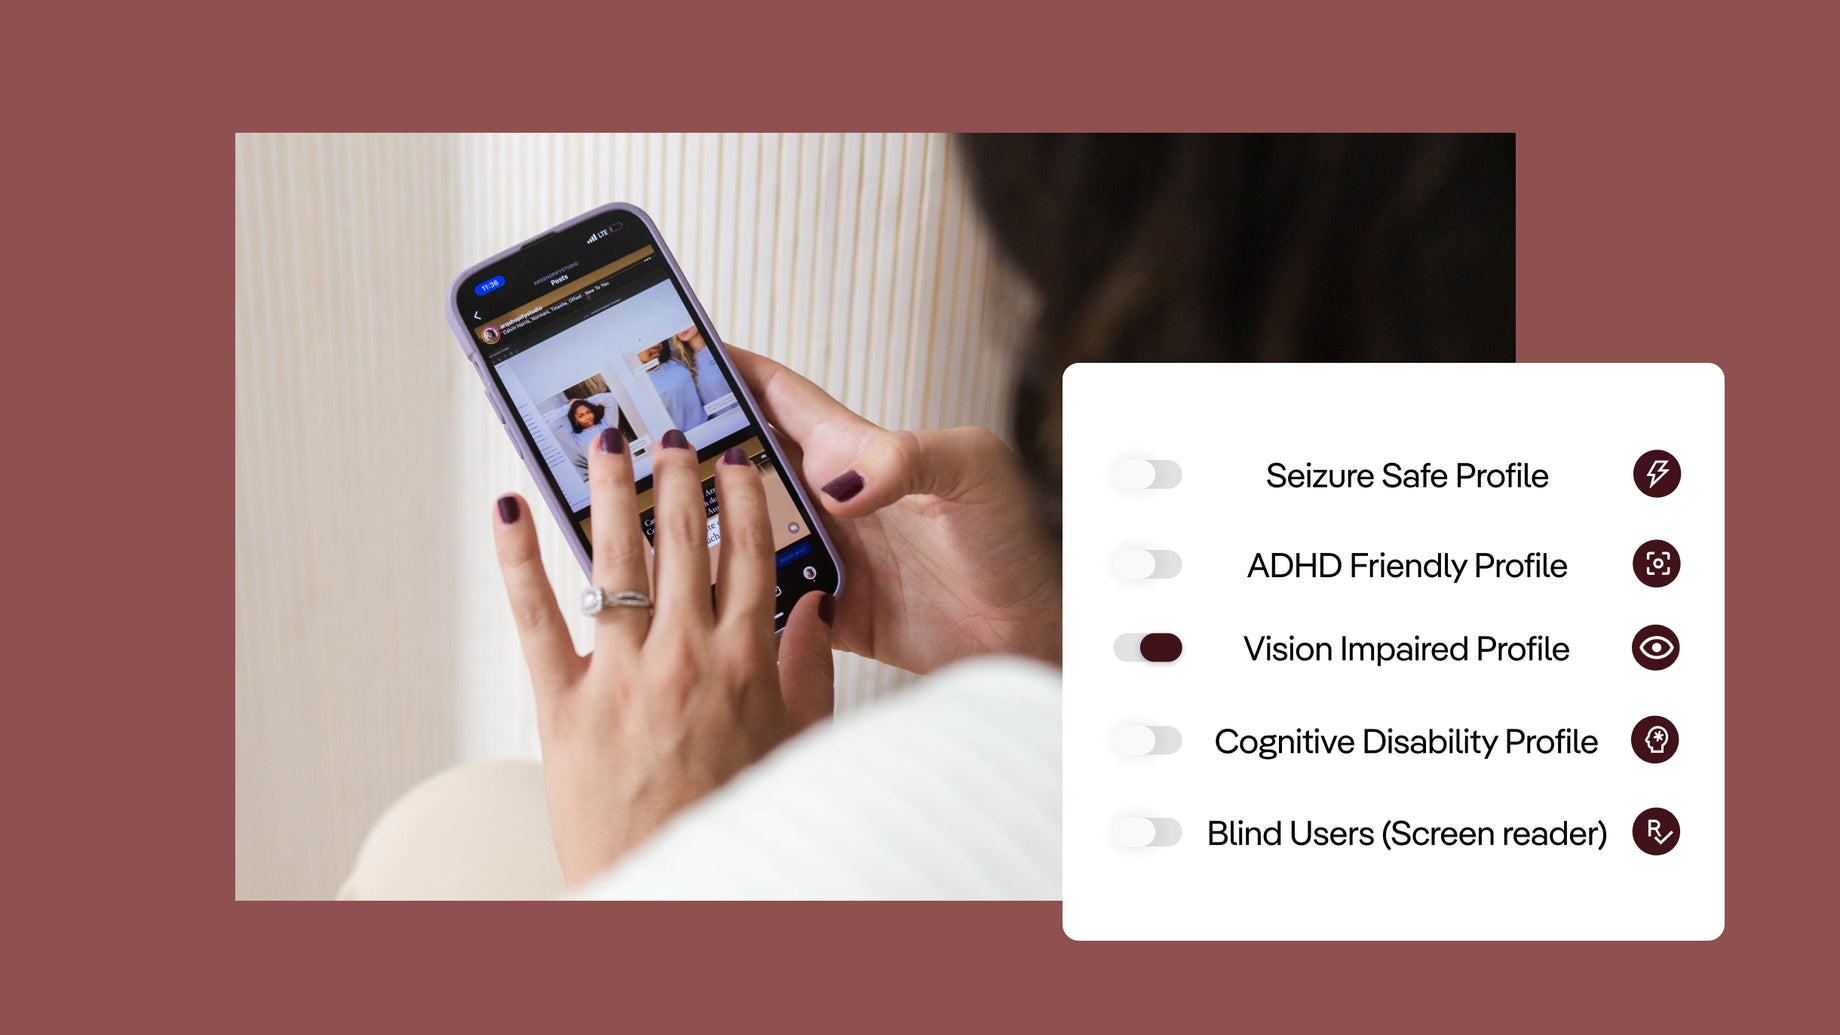 Shopify ADA Accessibility: Take Your Business to the Next Level with Digital Inclusion